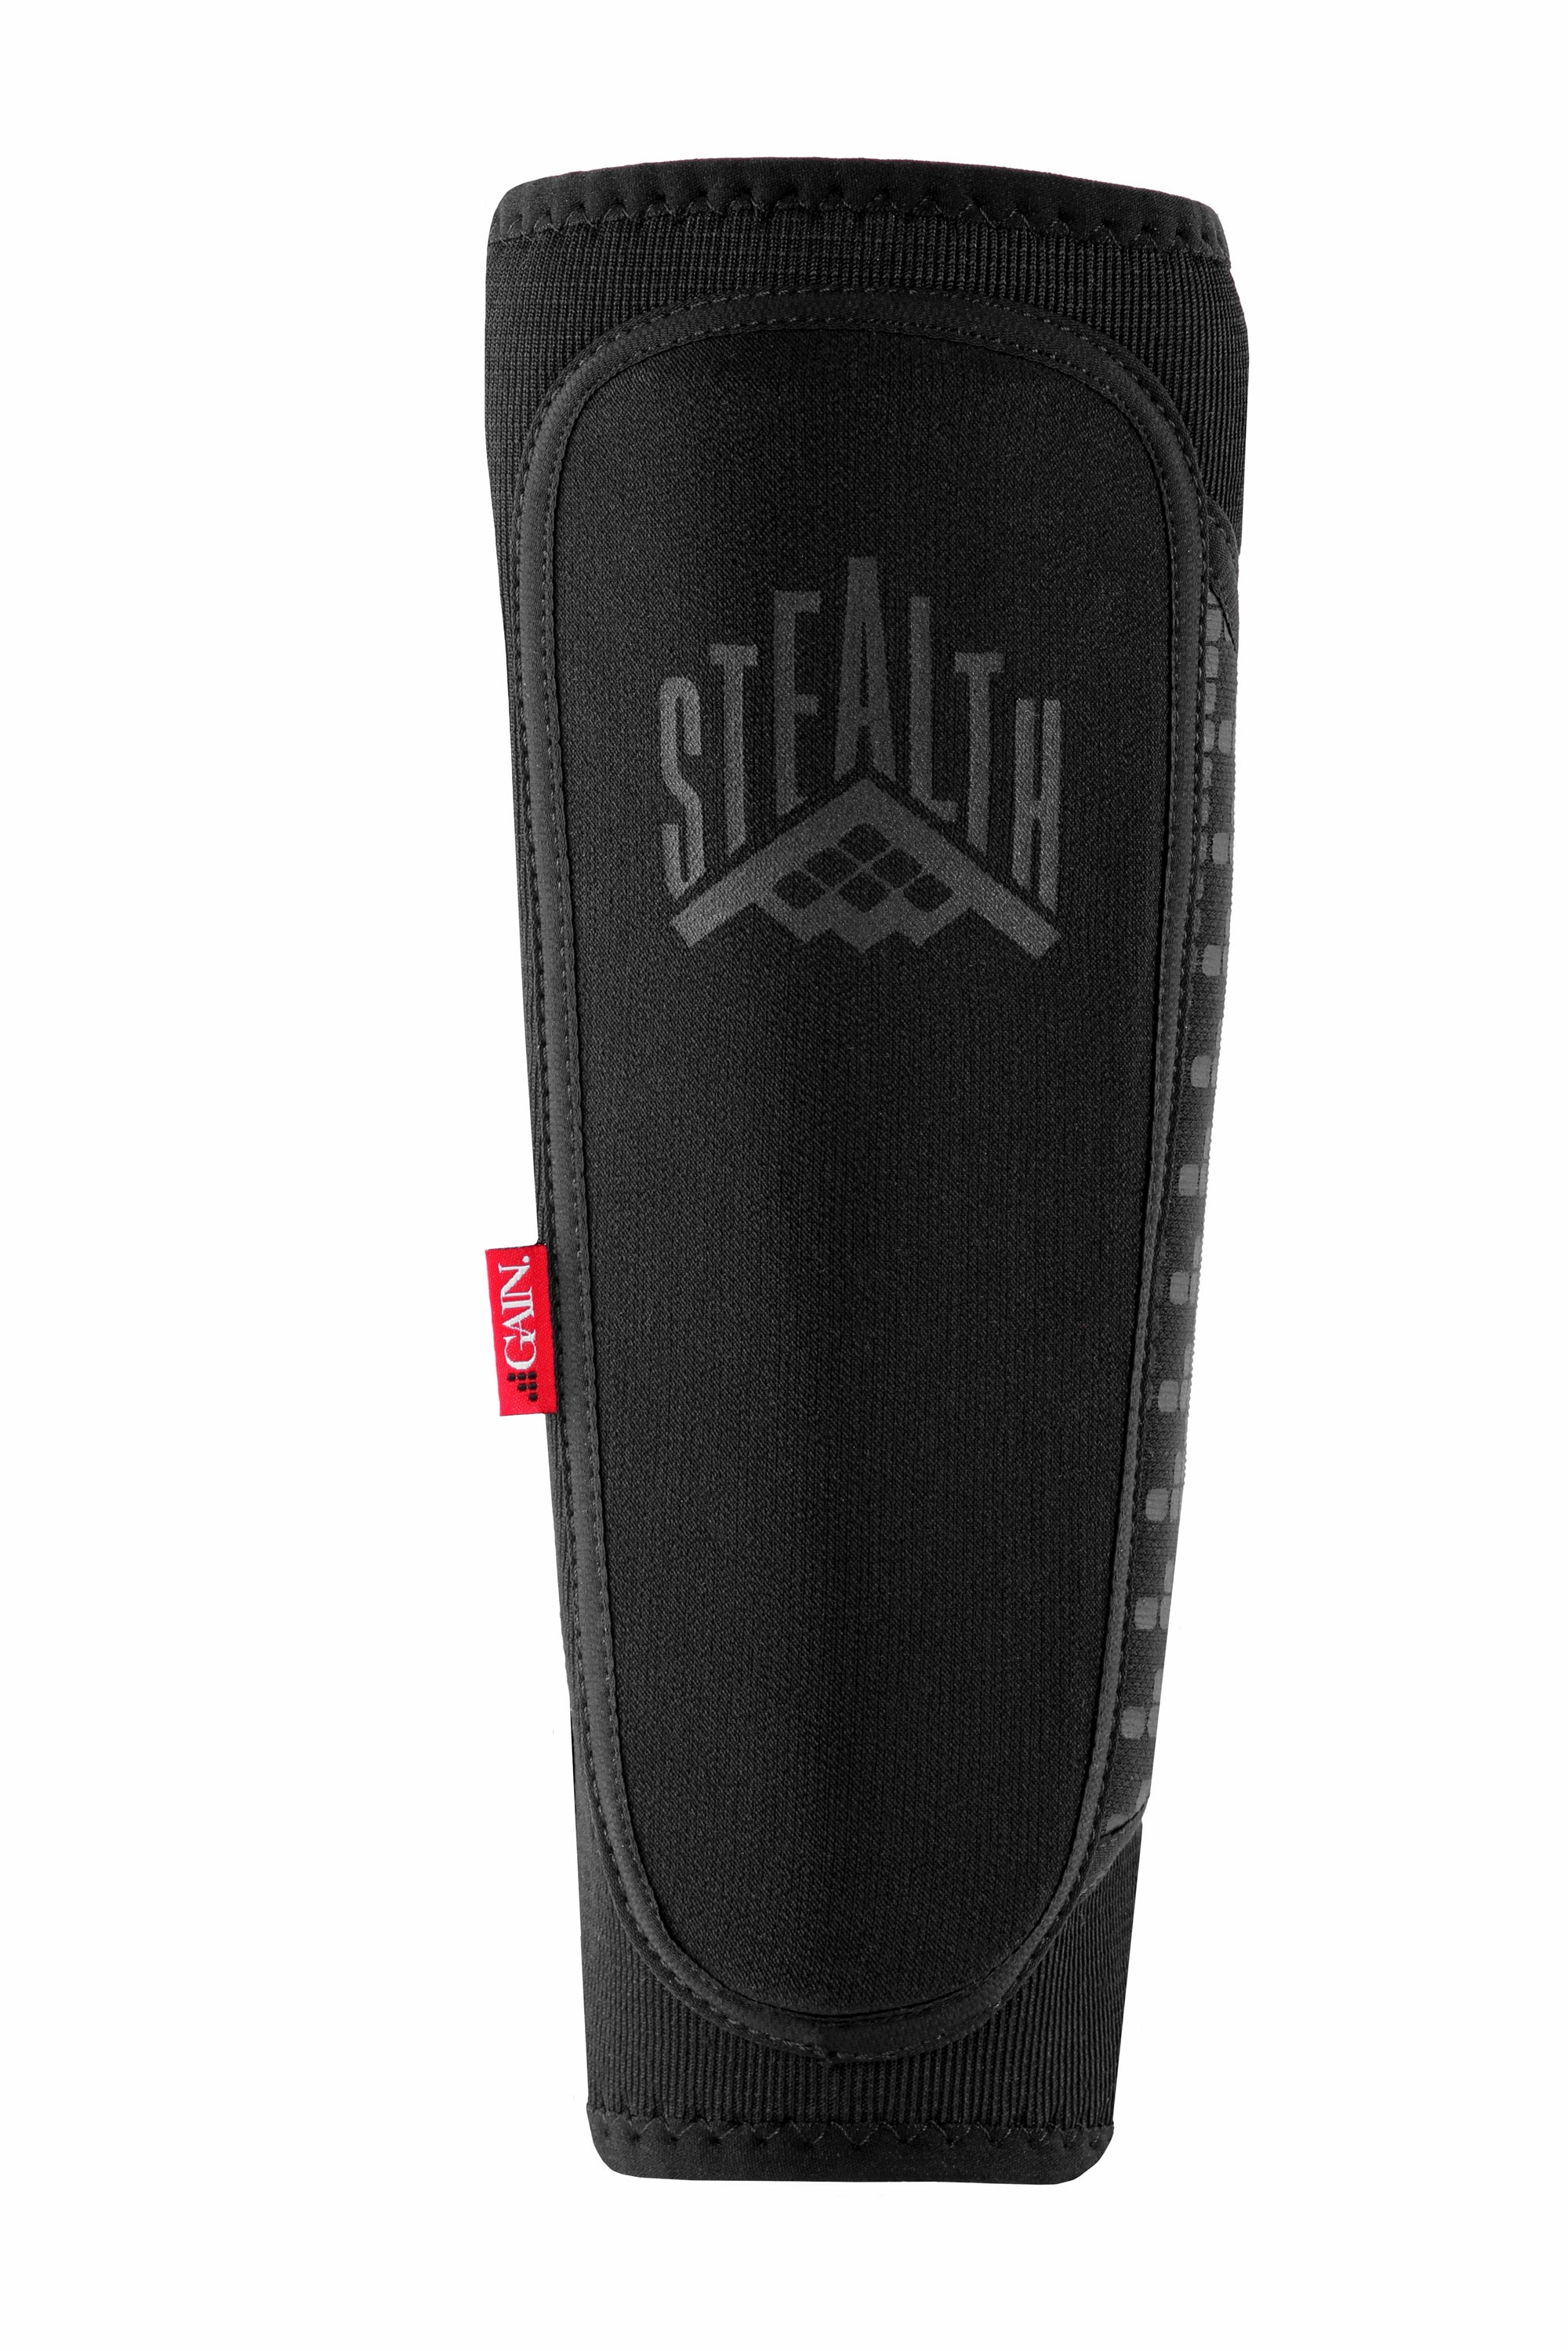 GAIN Protection STEALTH Shin Guards v2